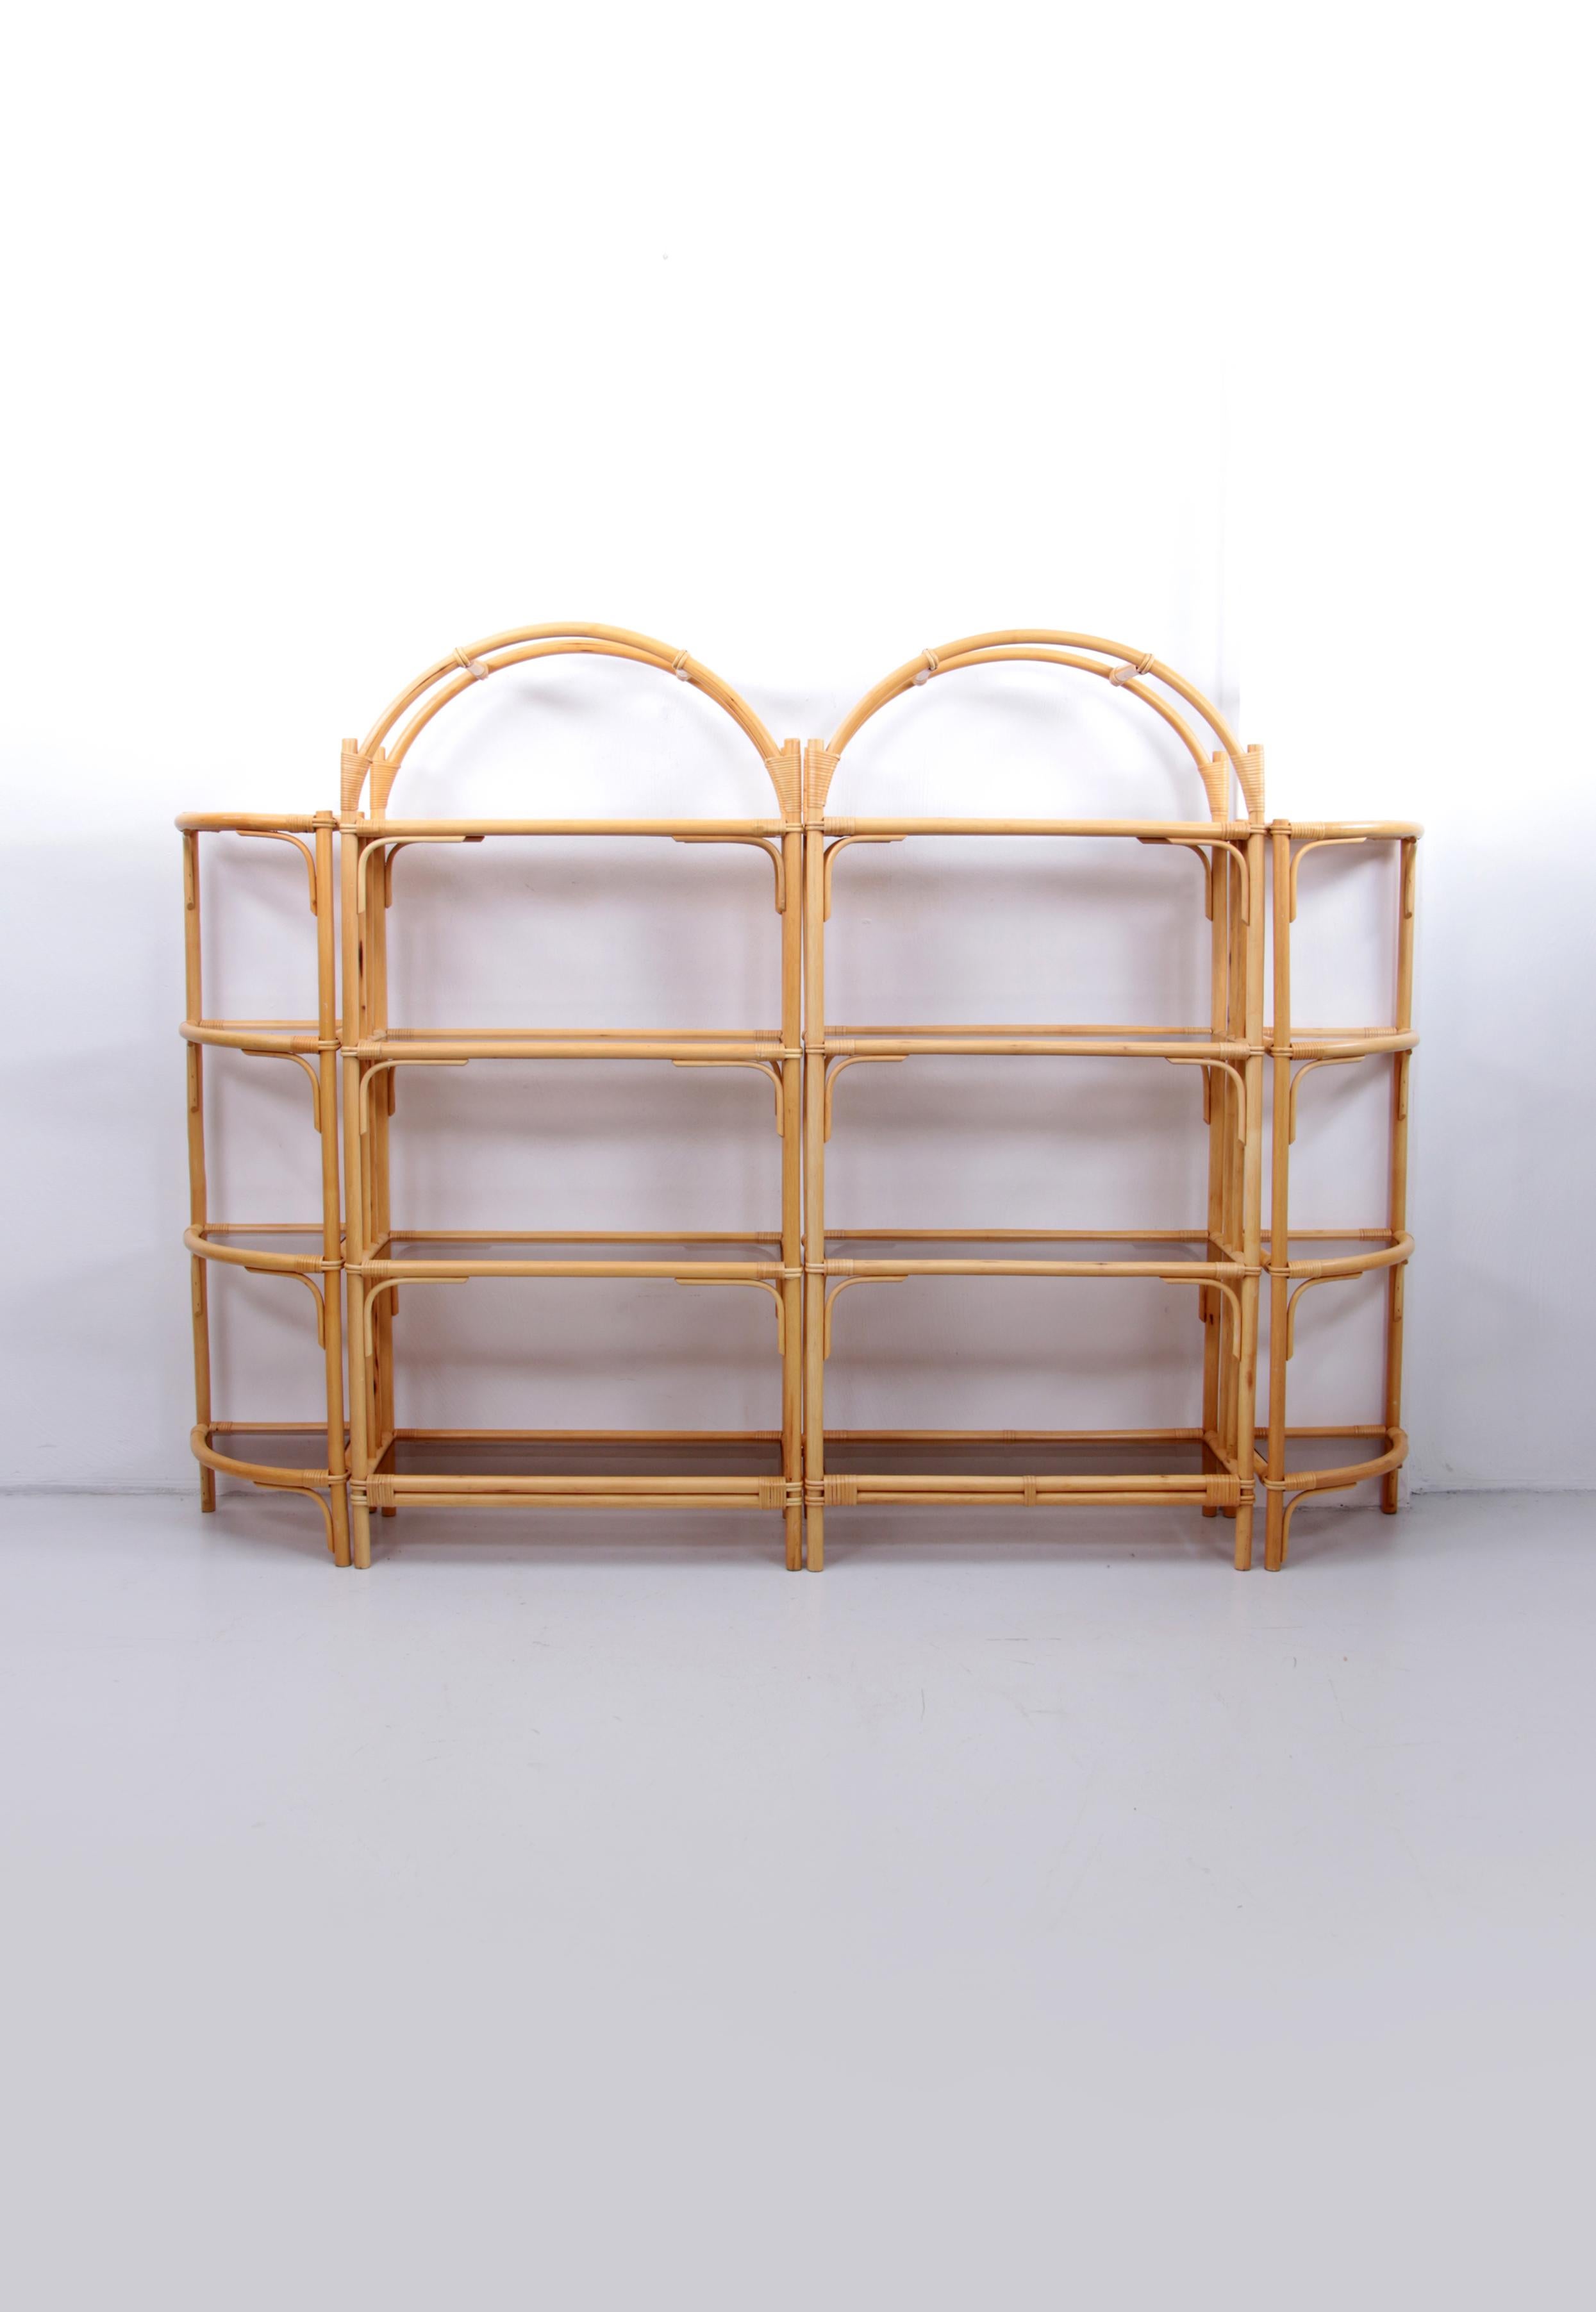 A beautiful bamboo wall unit with curved bamboo freestanding unit or bookcase from the 1970s.

Wonderful Scandinavian feeling, from Denmark.

This piece of furniture is in perfect condition.

The dark glass is also original, the furniture